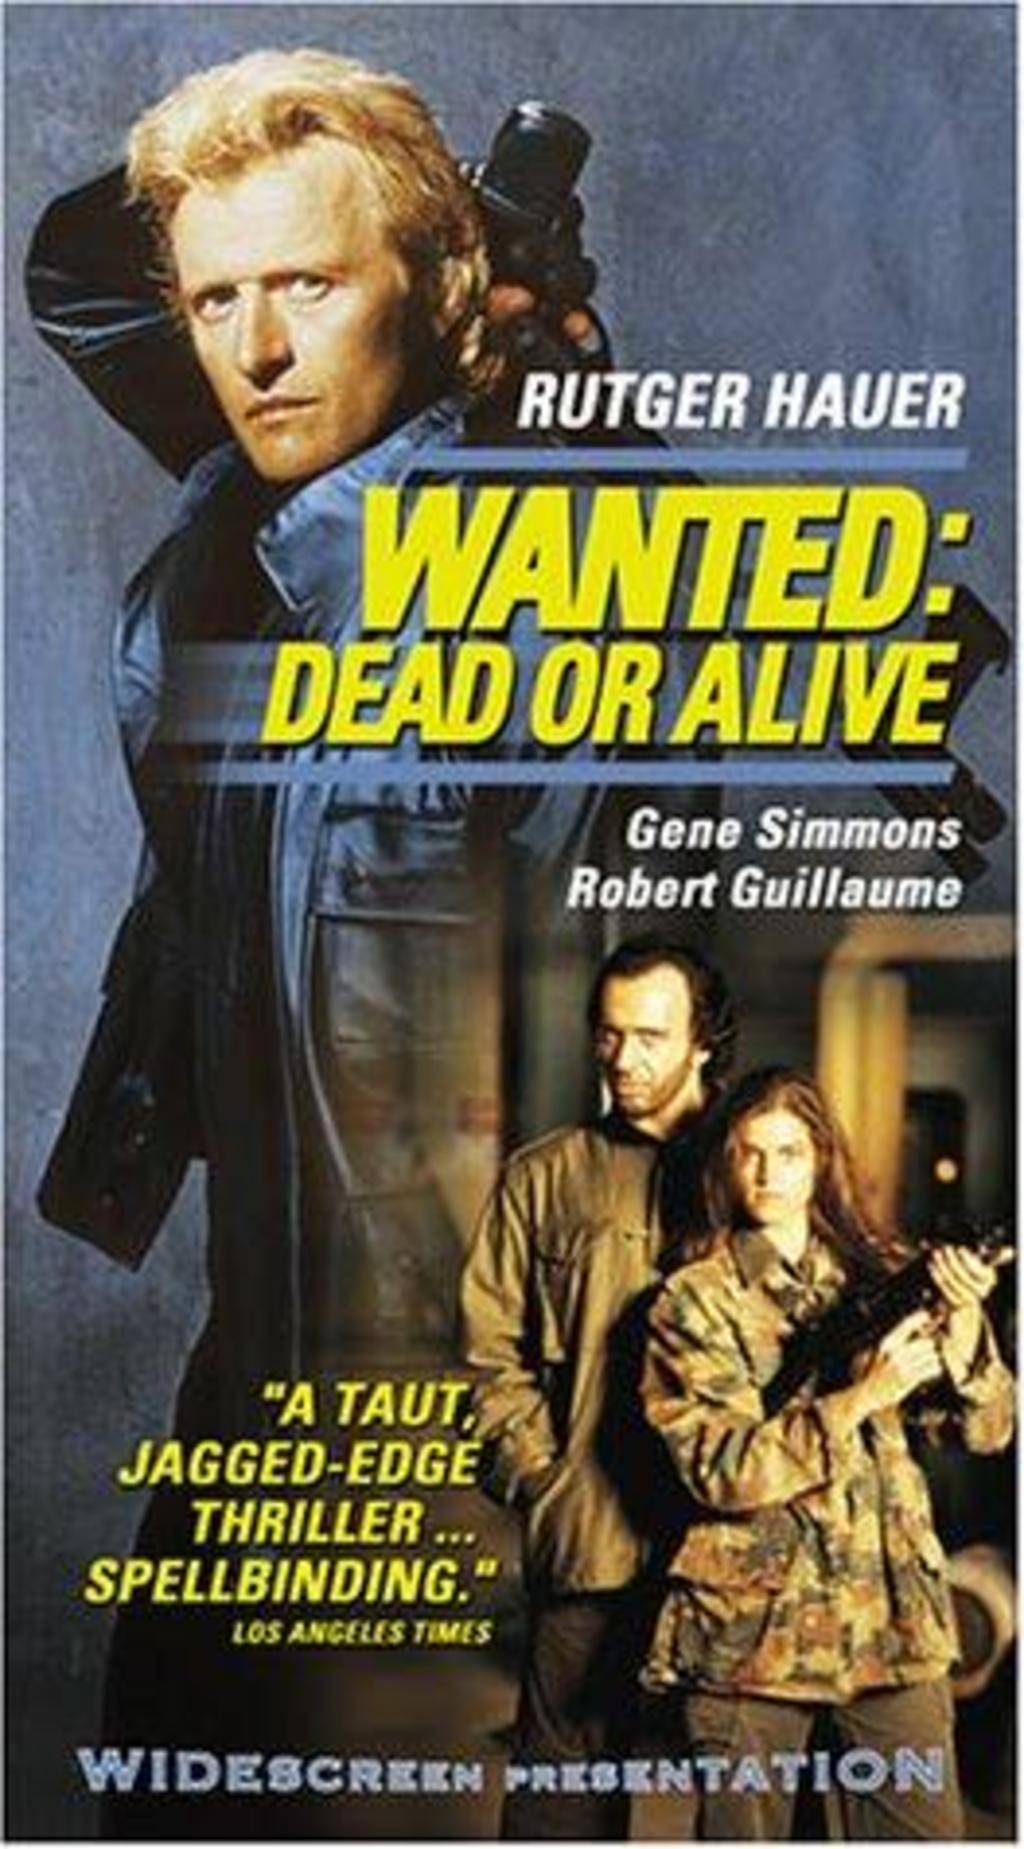 Watch Wanted: Dead or Alive on Netflix Today ...